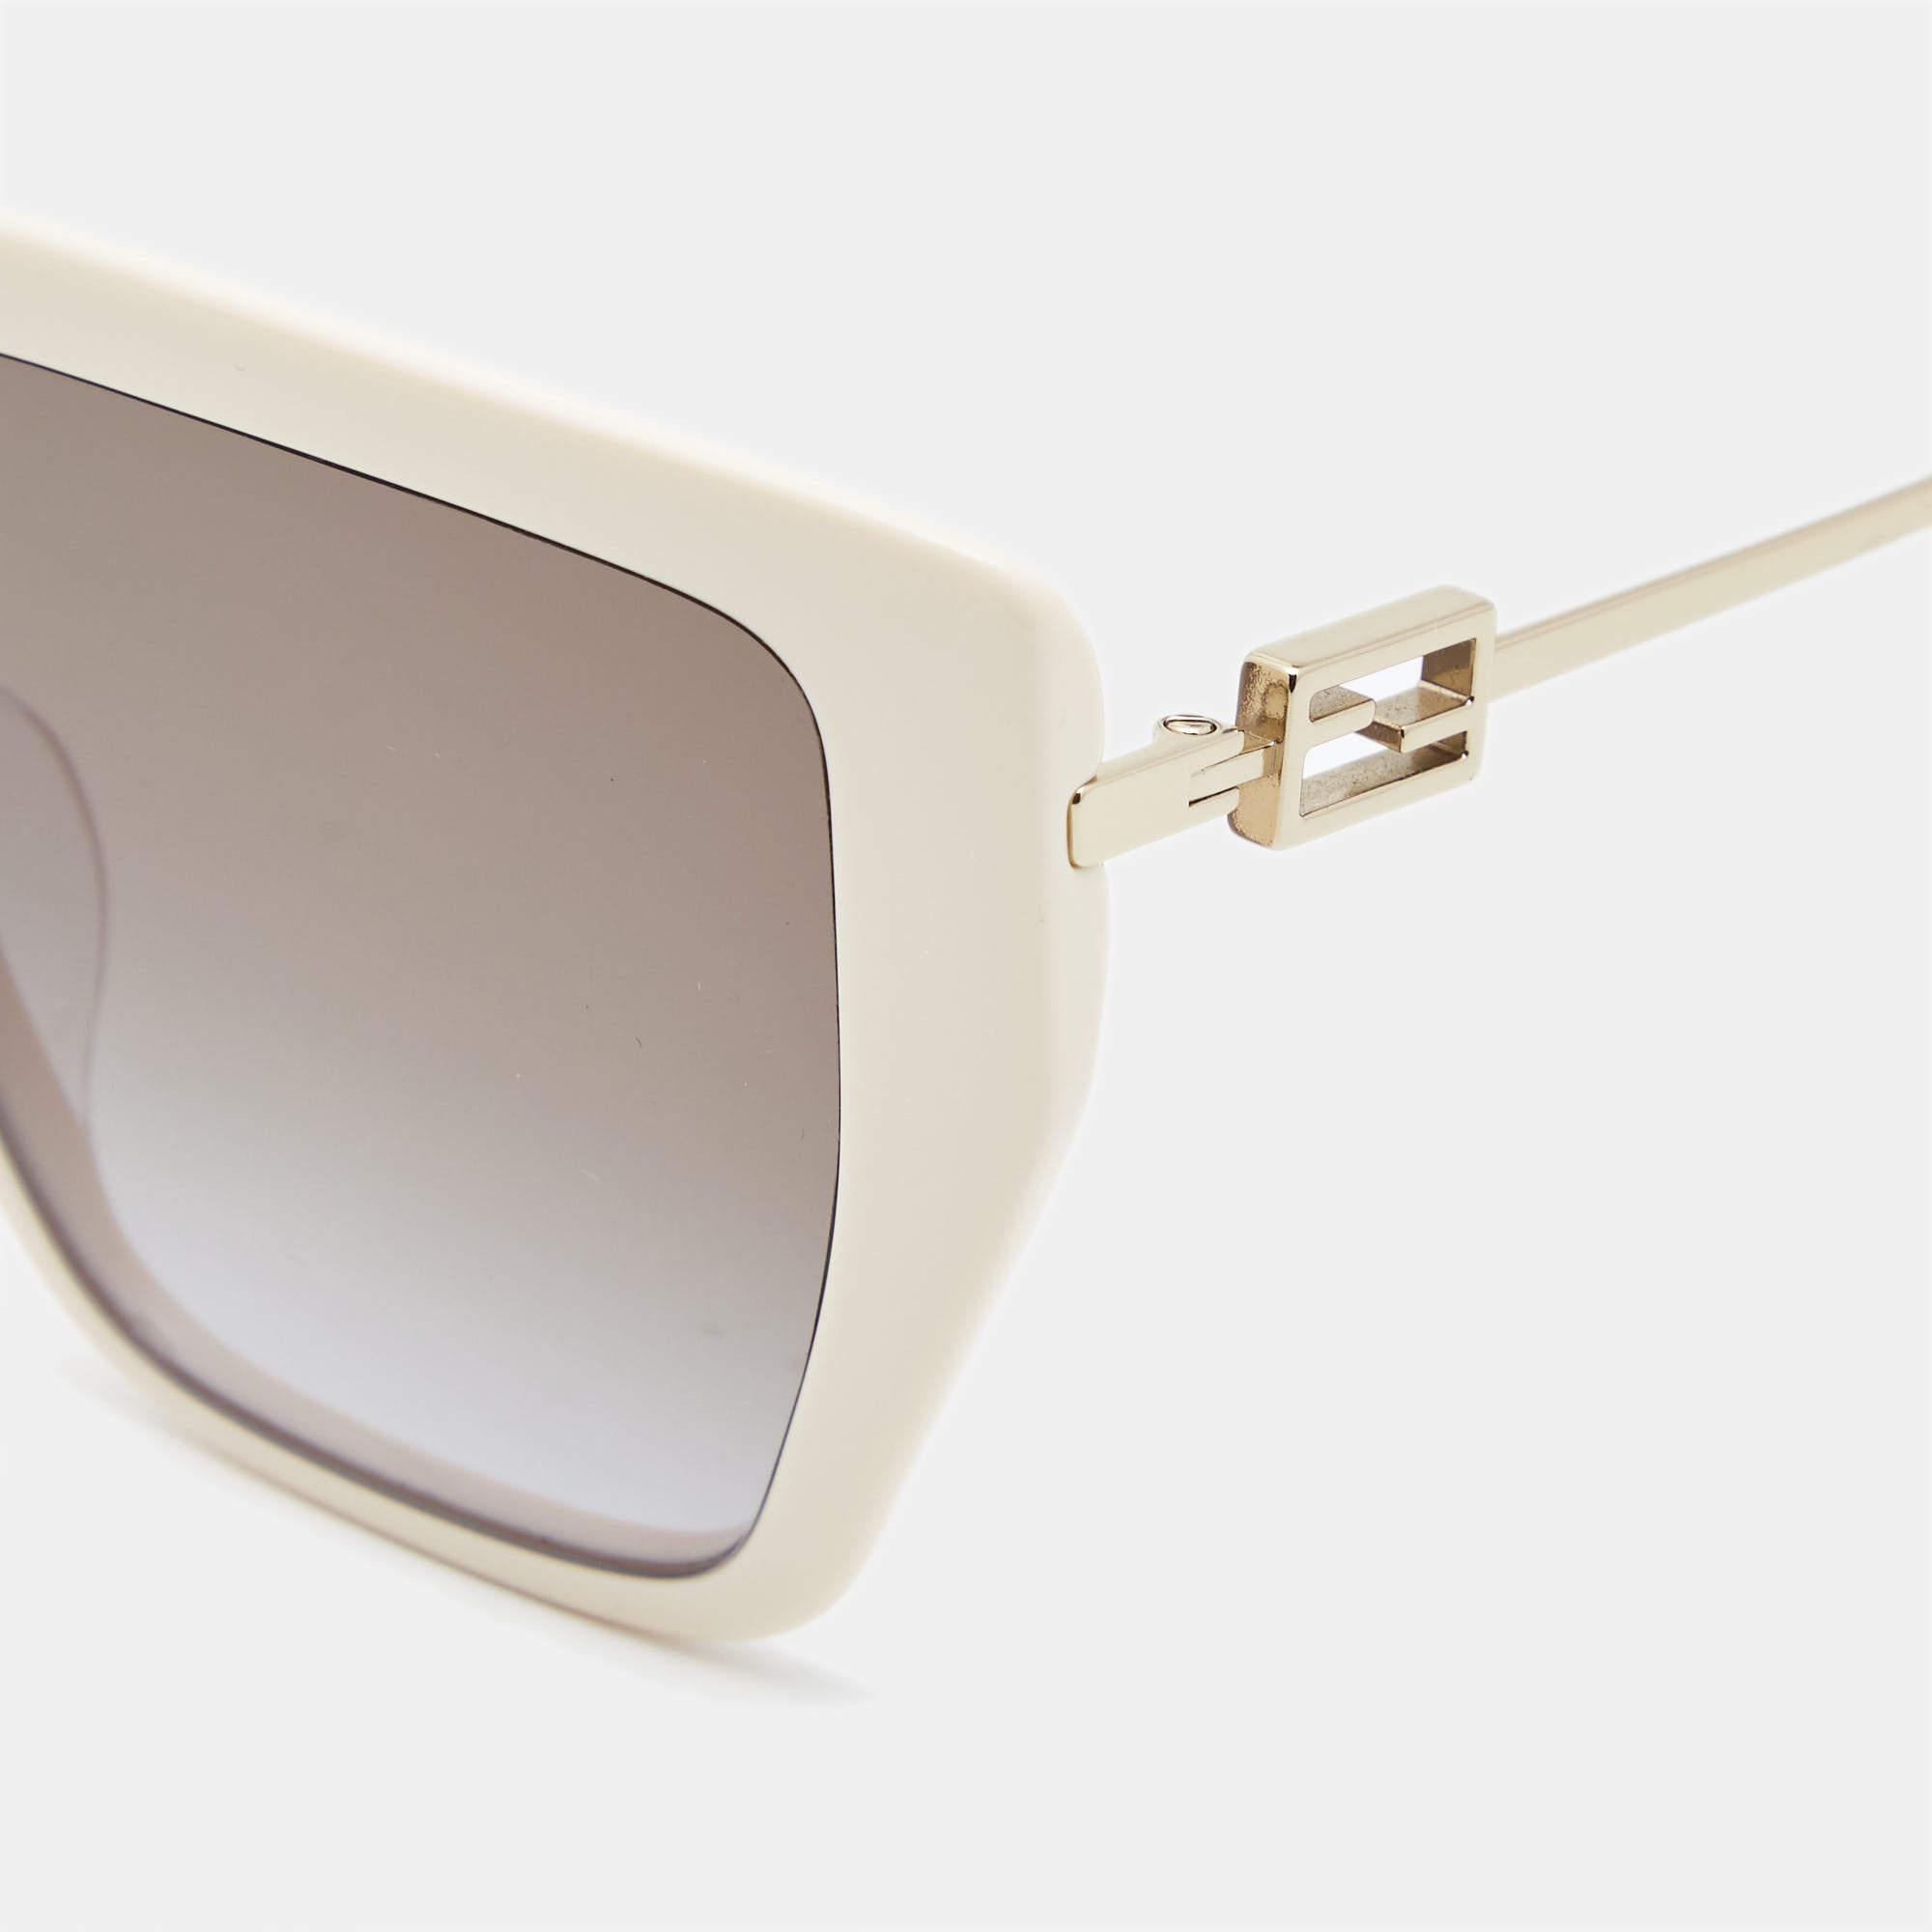 The stylish frame and good-quality lenses make these sunglasses a high-fashion accessory that you must own. Designed by Fendi, the pair will look best with your statement outfits.

Includes
Authenticity Card, Original Box, Original Pouch, Original